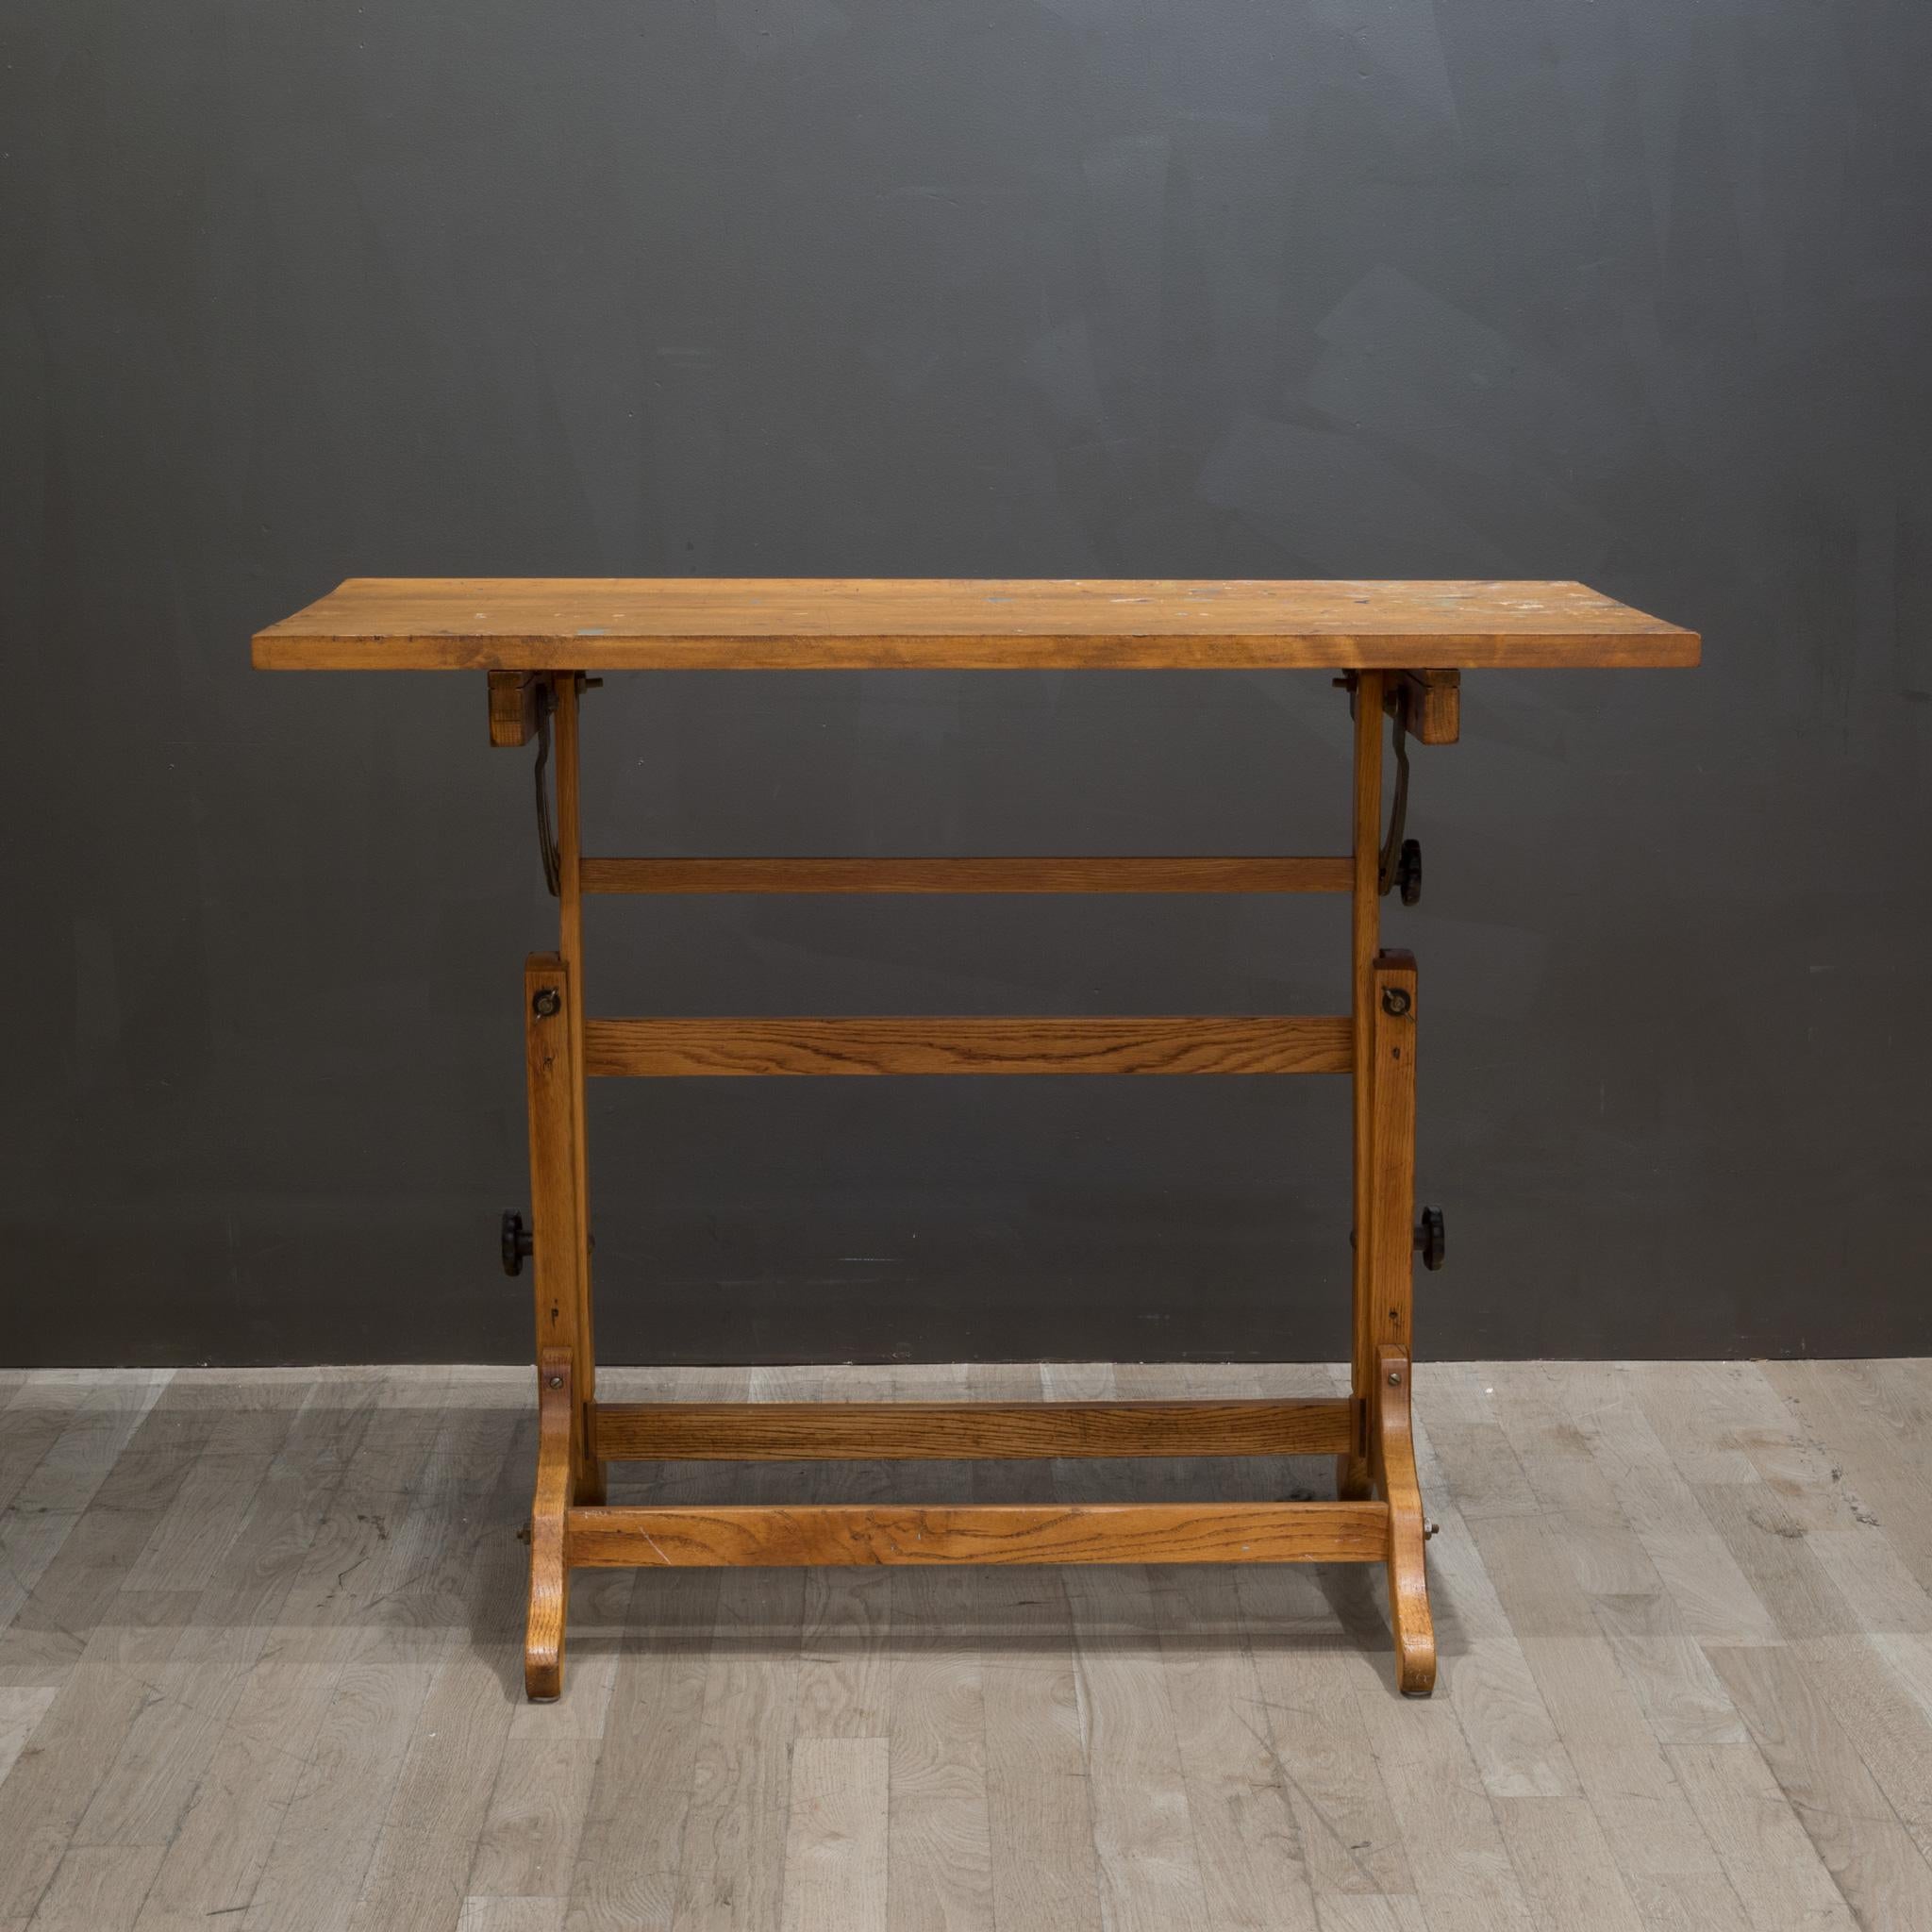 American Antique Adjustable Redwood and Oak Drafting Table c.1930-1940